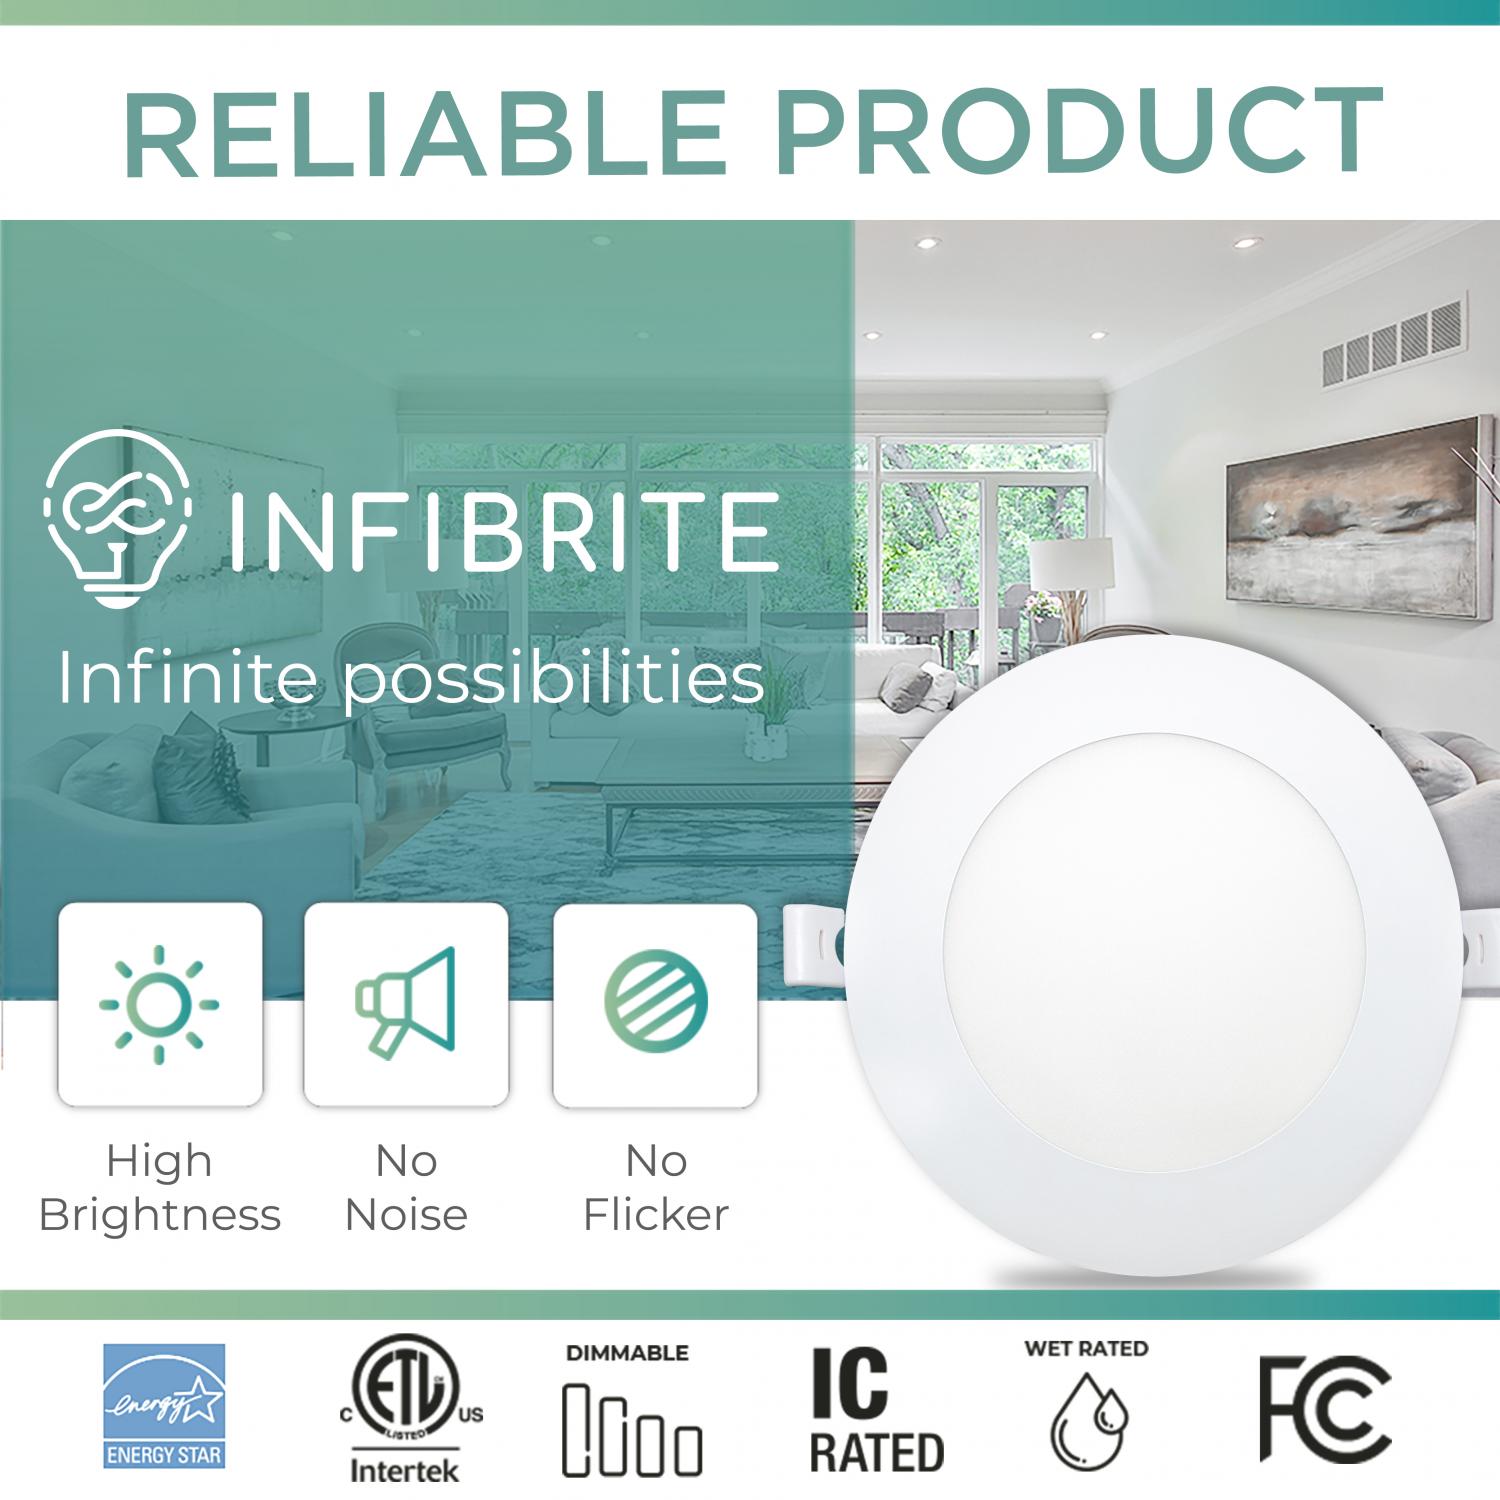 Infibrite 6 Inch 3000K/4000K/5000K Selectable 12W 1050LM Ultra-Slim LED Ceiling Light with Junction Box, Flush Mount, Dimmable, Fixture for Bedroom, Wet Rated for Bathroom, Easy Install, 110W Eqv, ETL & Energy Star, US Company (6 Pack)